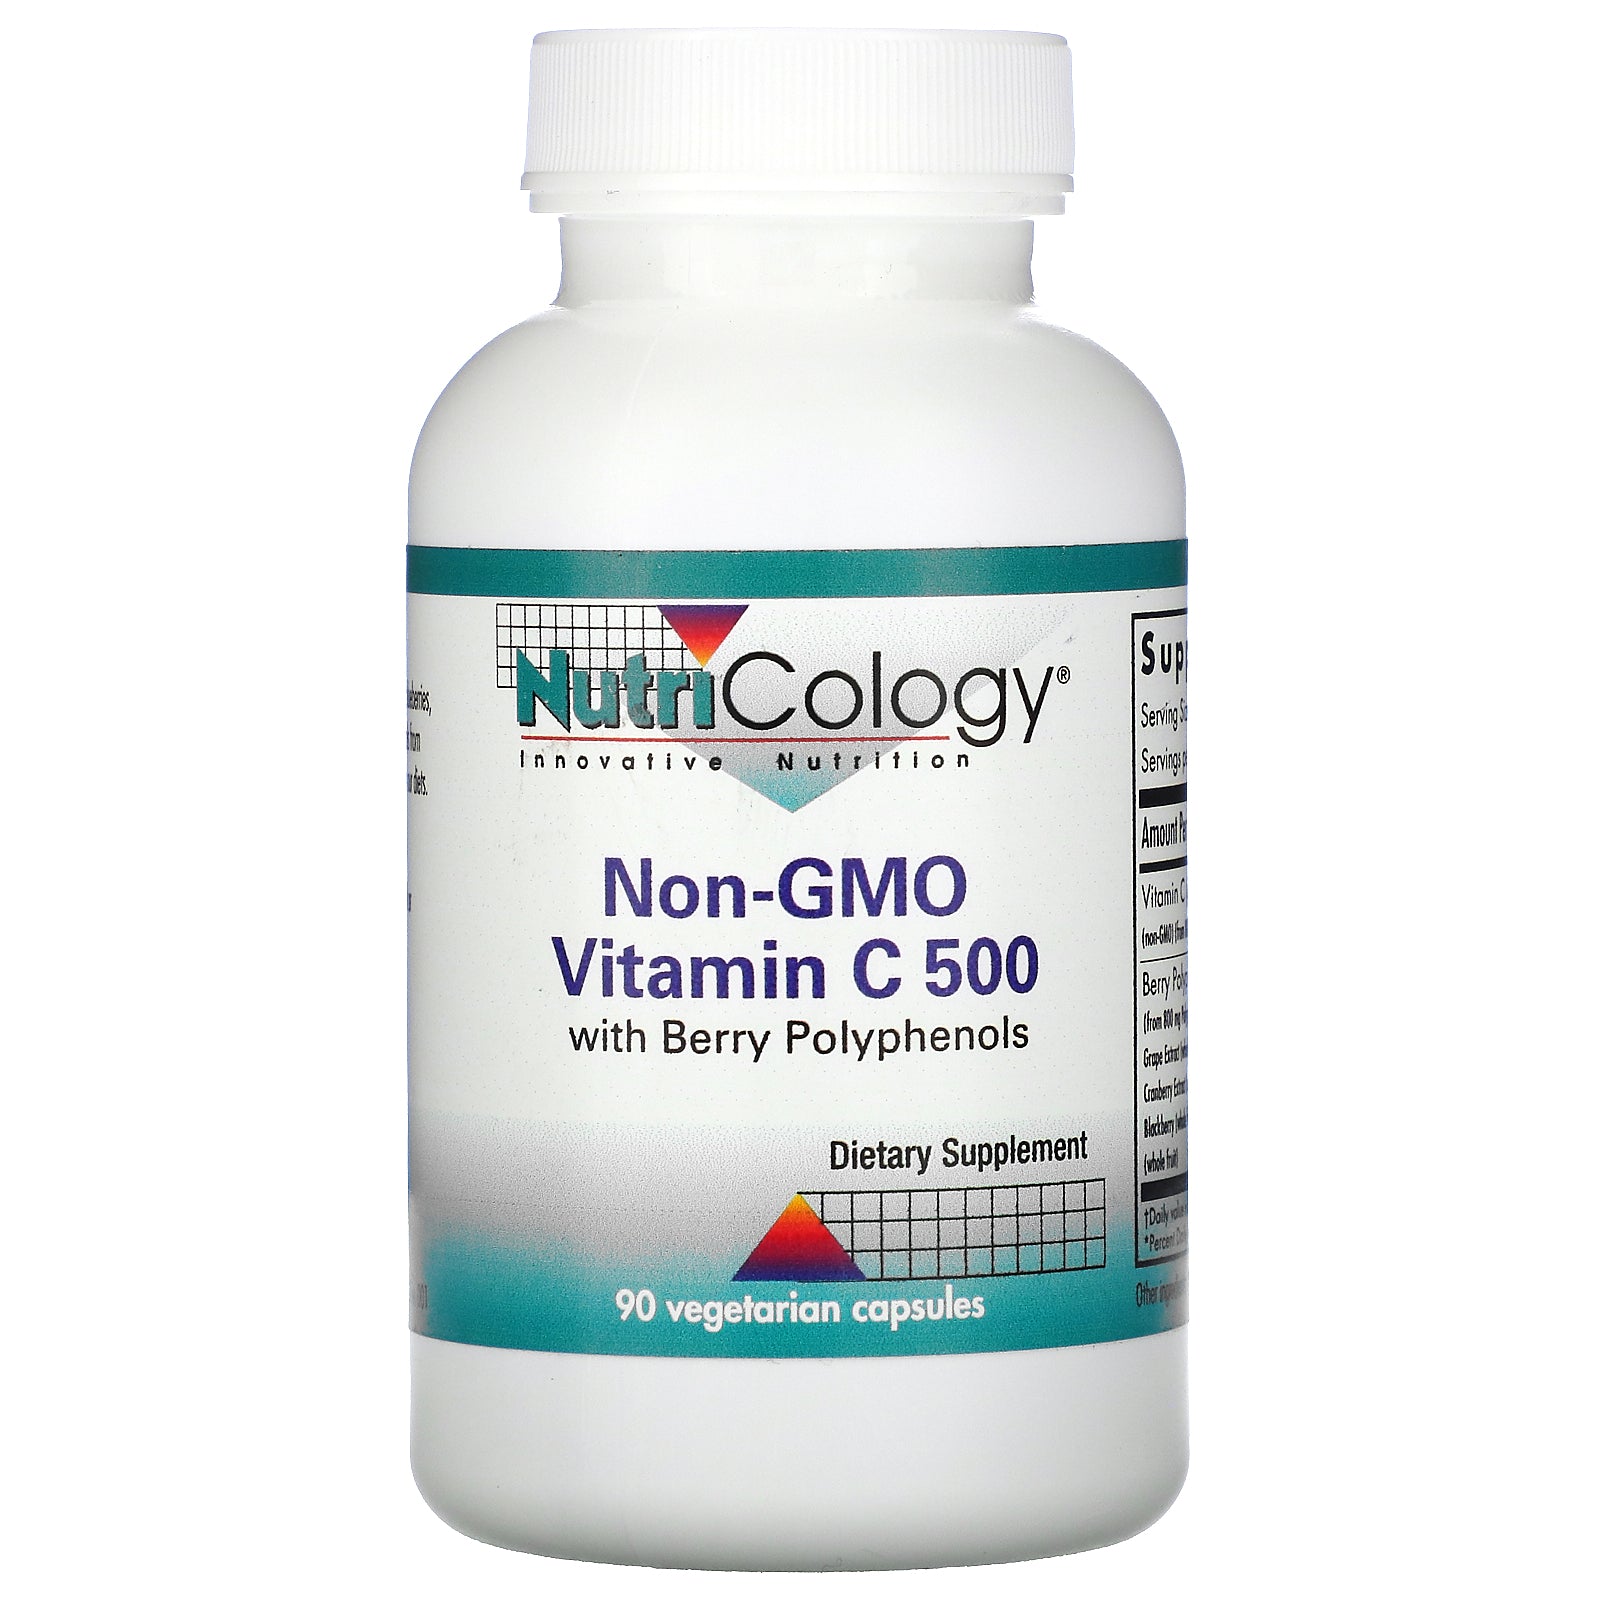 Nutricology, Non-GMO Vitamin C 500  with Berry Polyphenols, 90 Vegetarian Capsules